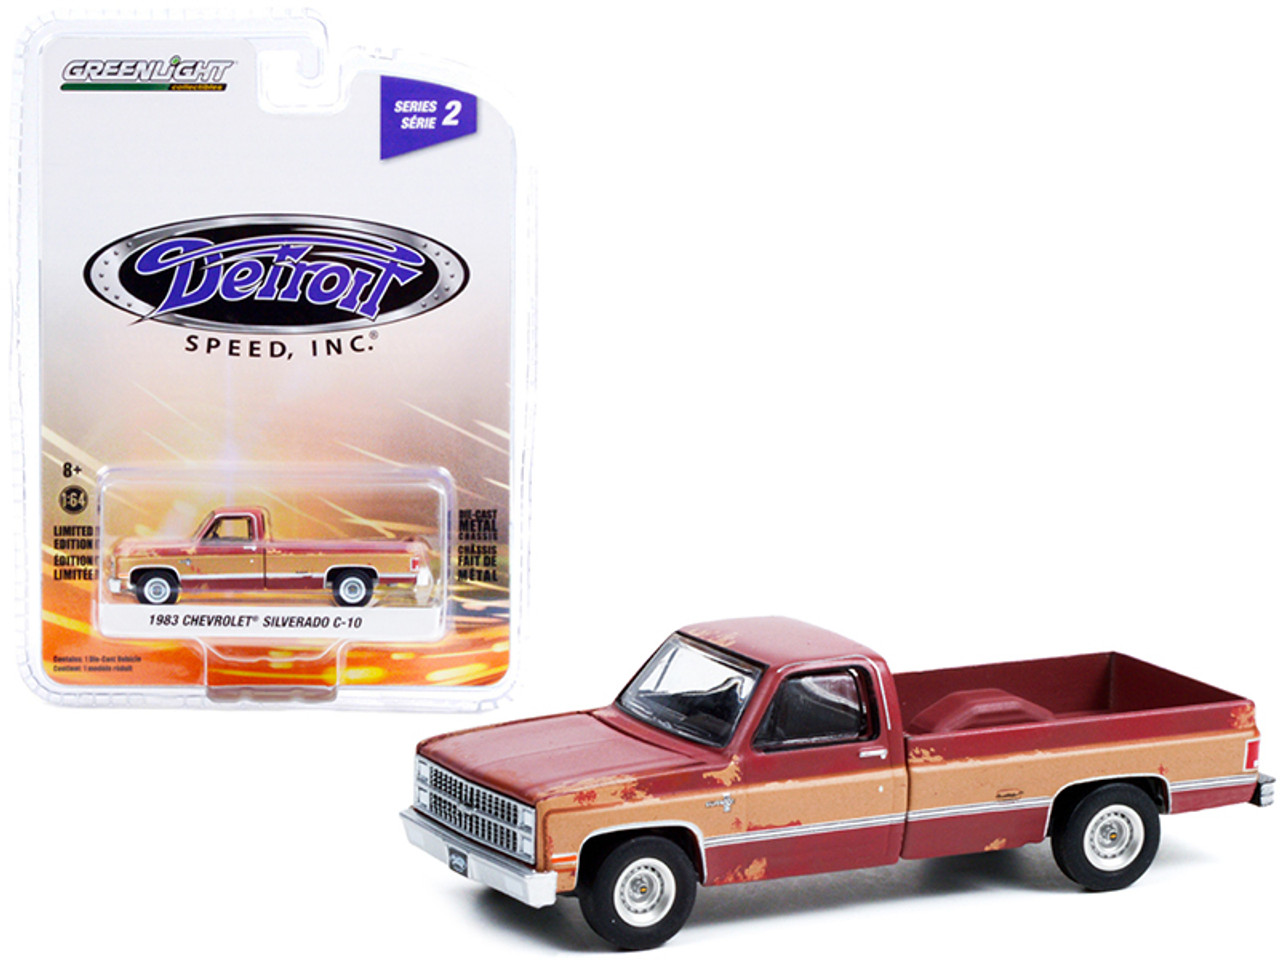 1983 Chevrolet Silverado C-10 Pickup Truck Burgundy with Tan Sides (Weathered) "Detroit Speed Inc." Series 2 1/64 Diecast Model Car by Greenlight